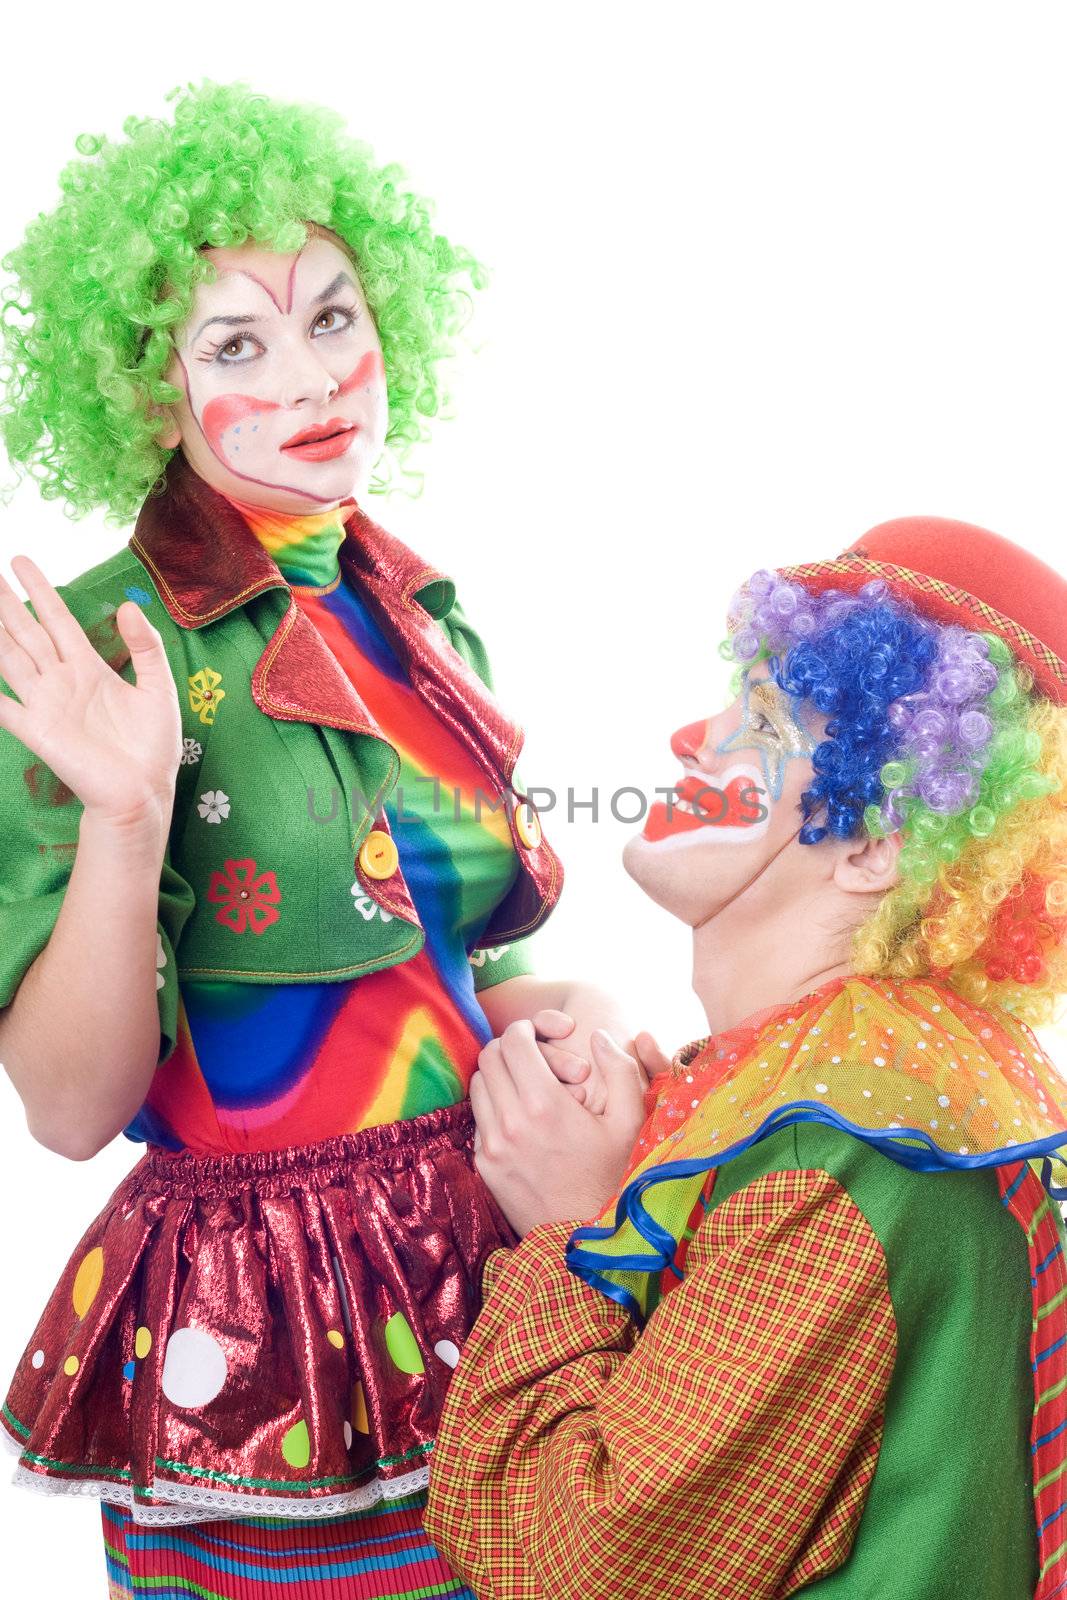 Funny loving couple of clowns by acidgrey